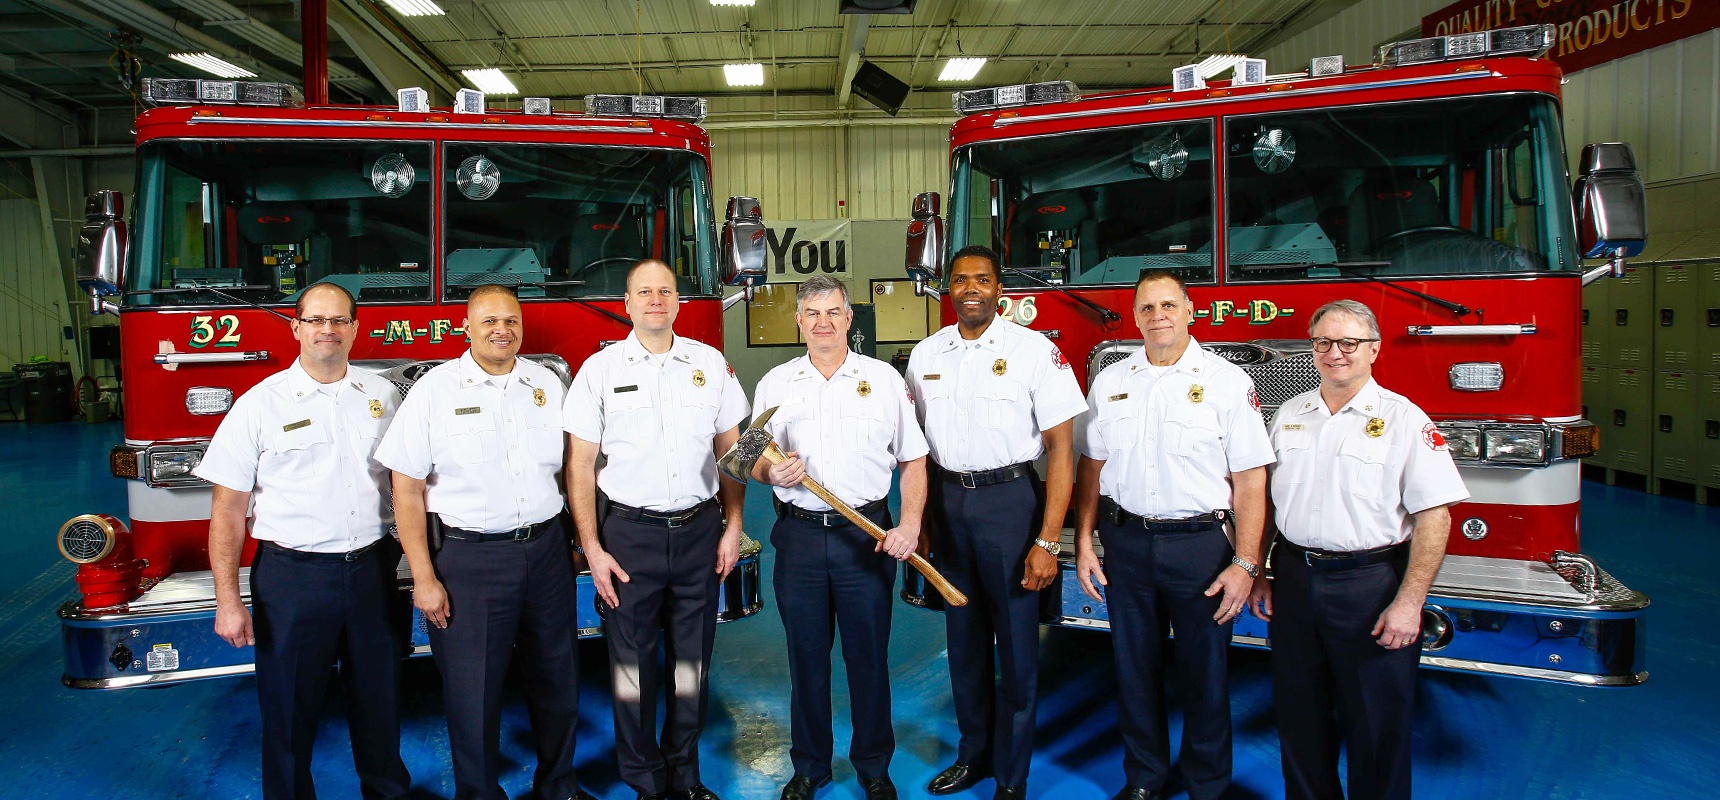 100-Percent-Pierce-Apparatus-Fleets-Now-On-Duty-at-Wisconsins-Two-Largest-Fire-Departments_Header.jpg